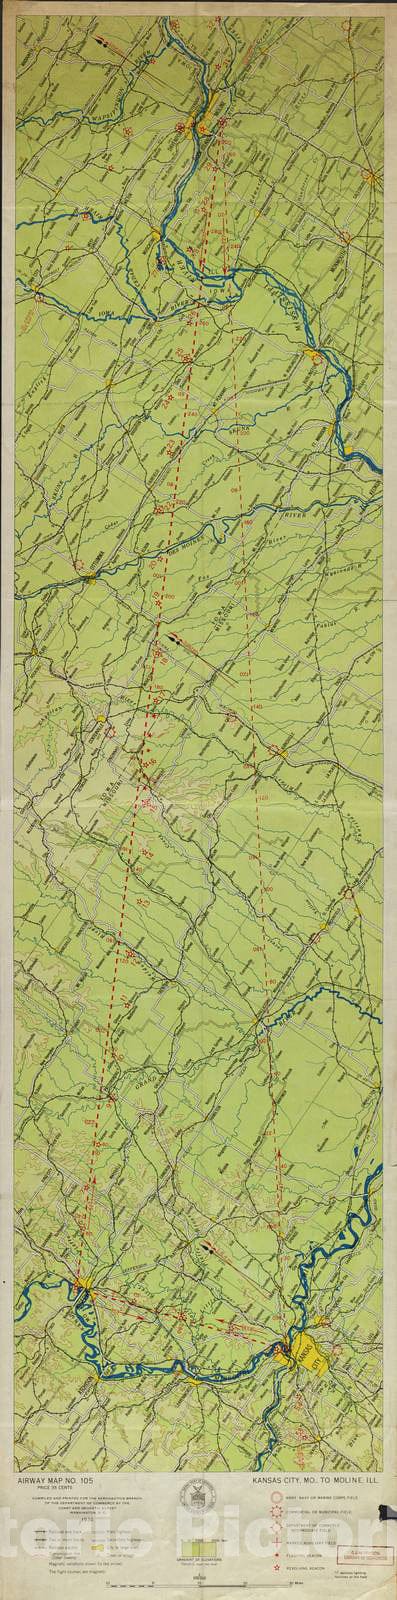 Historic 1924 Map - Aeronautical Strip maps of The United States. - No. 105, 1930 - Air Corps map